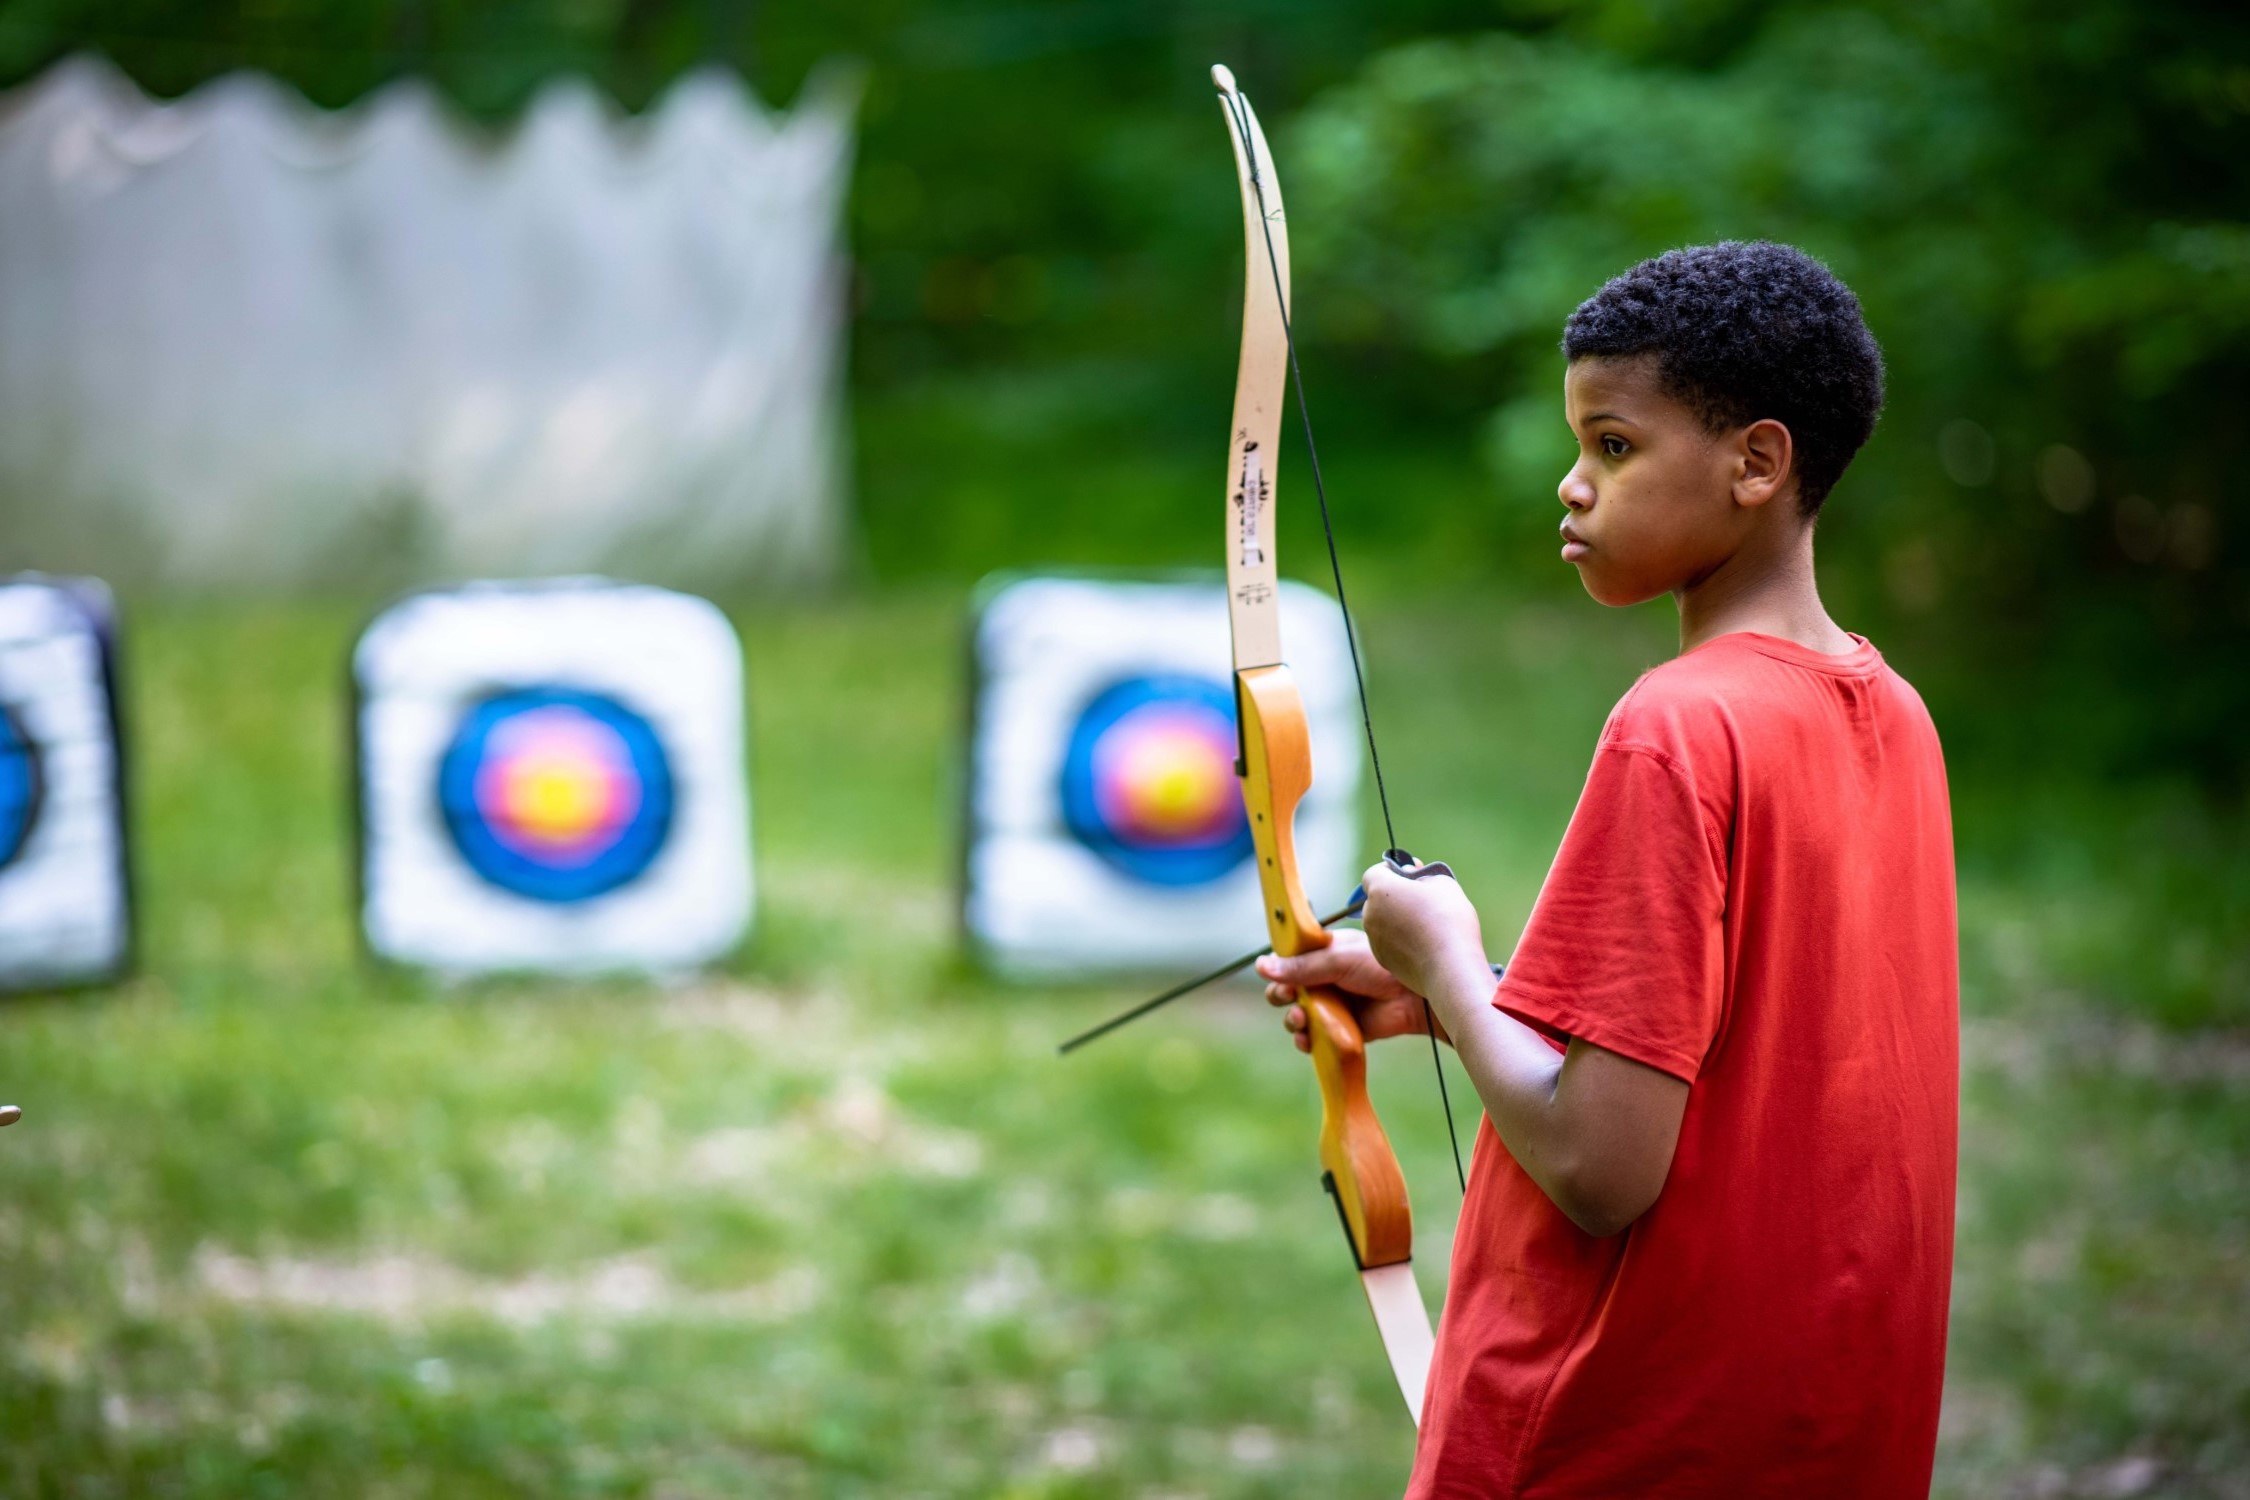 Young boy at an archery range holds a bow an arrow while looking to the side at the counselor, who is not visible in the photo